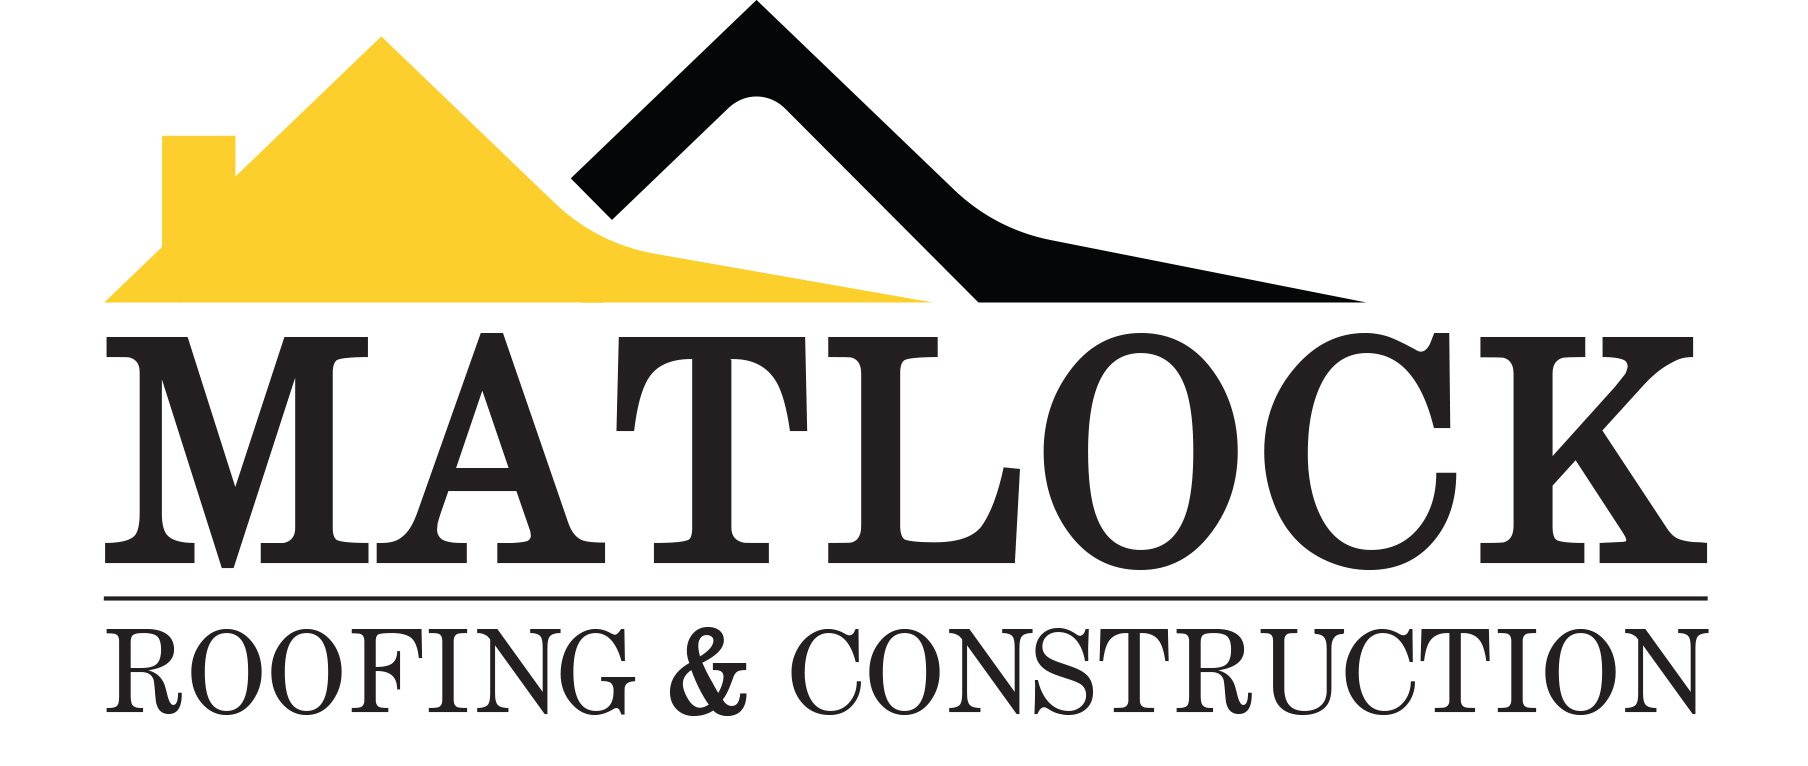 New Logo For Matlock Roofing & Construction